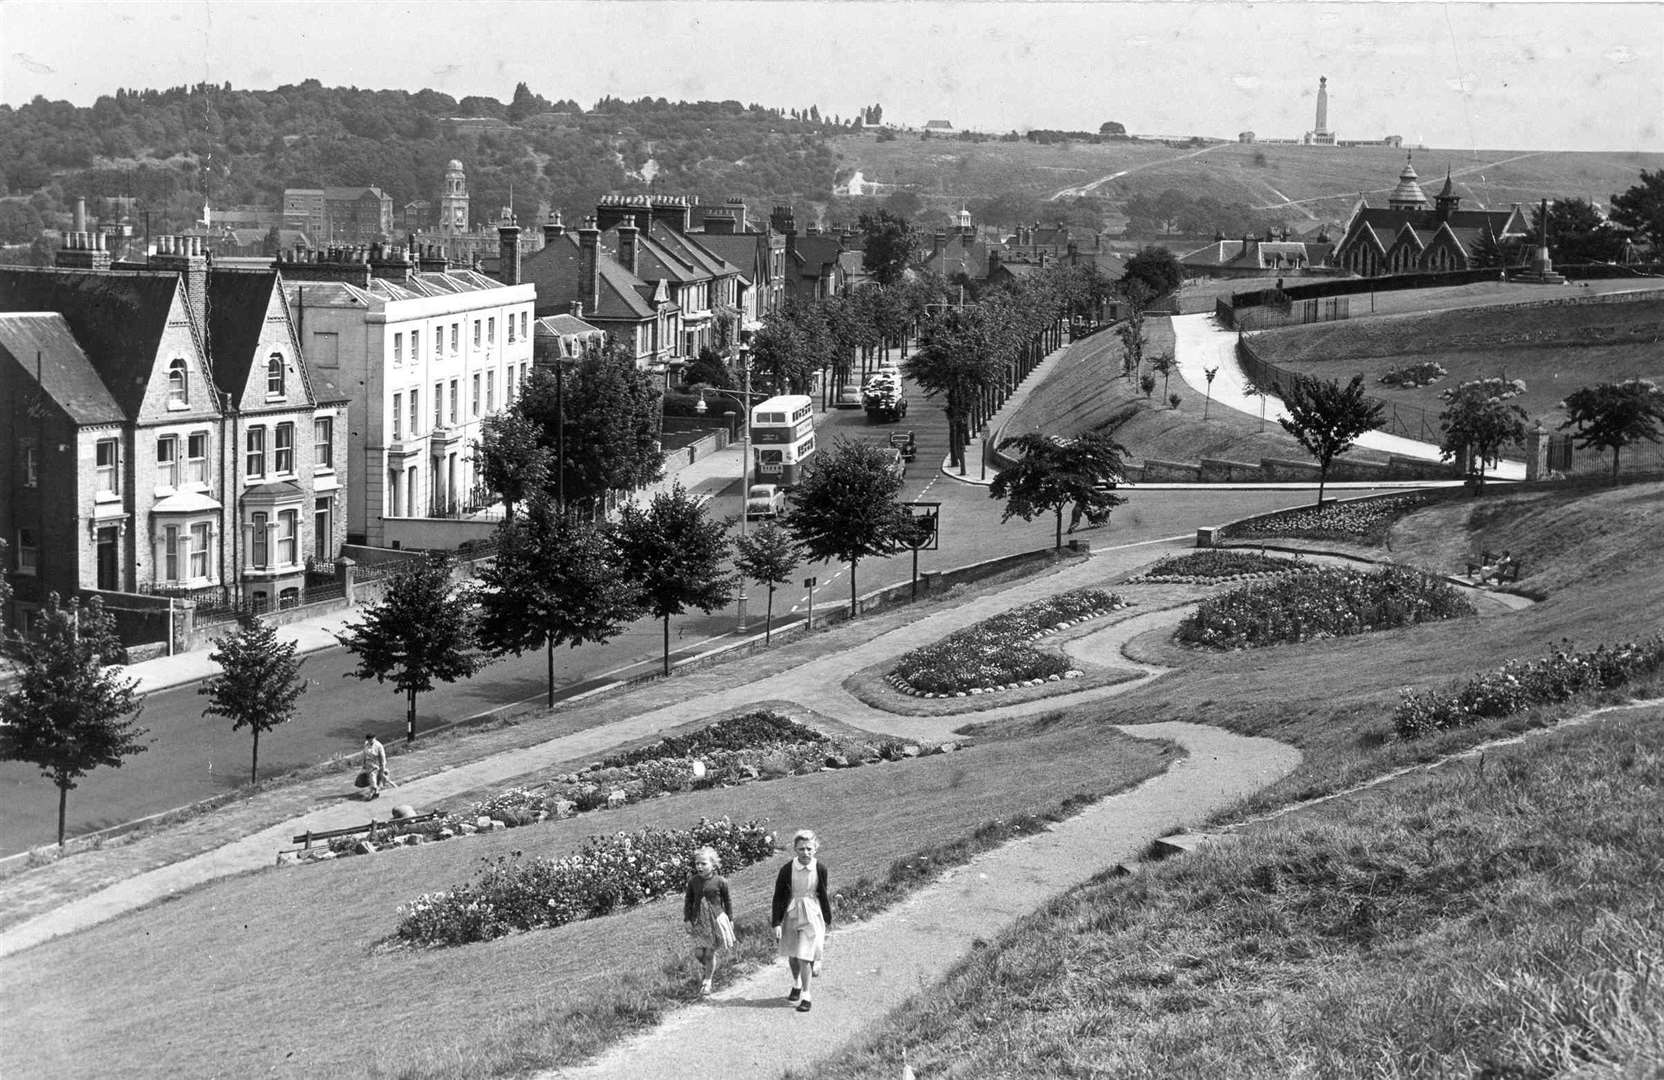 Where Rochester joins Chatham in New Road - a view from 1955